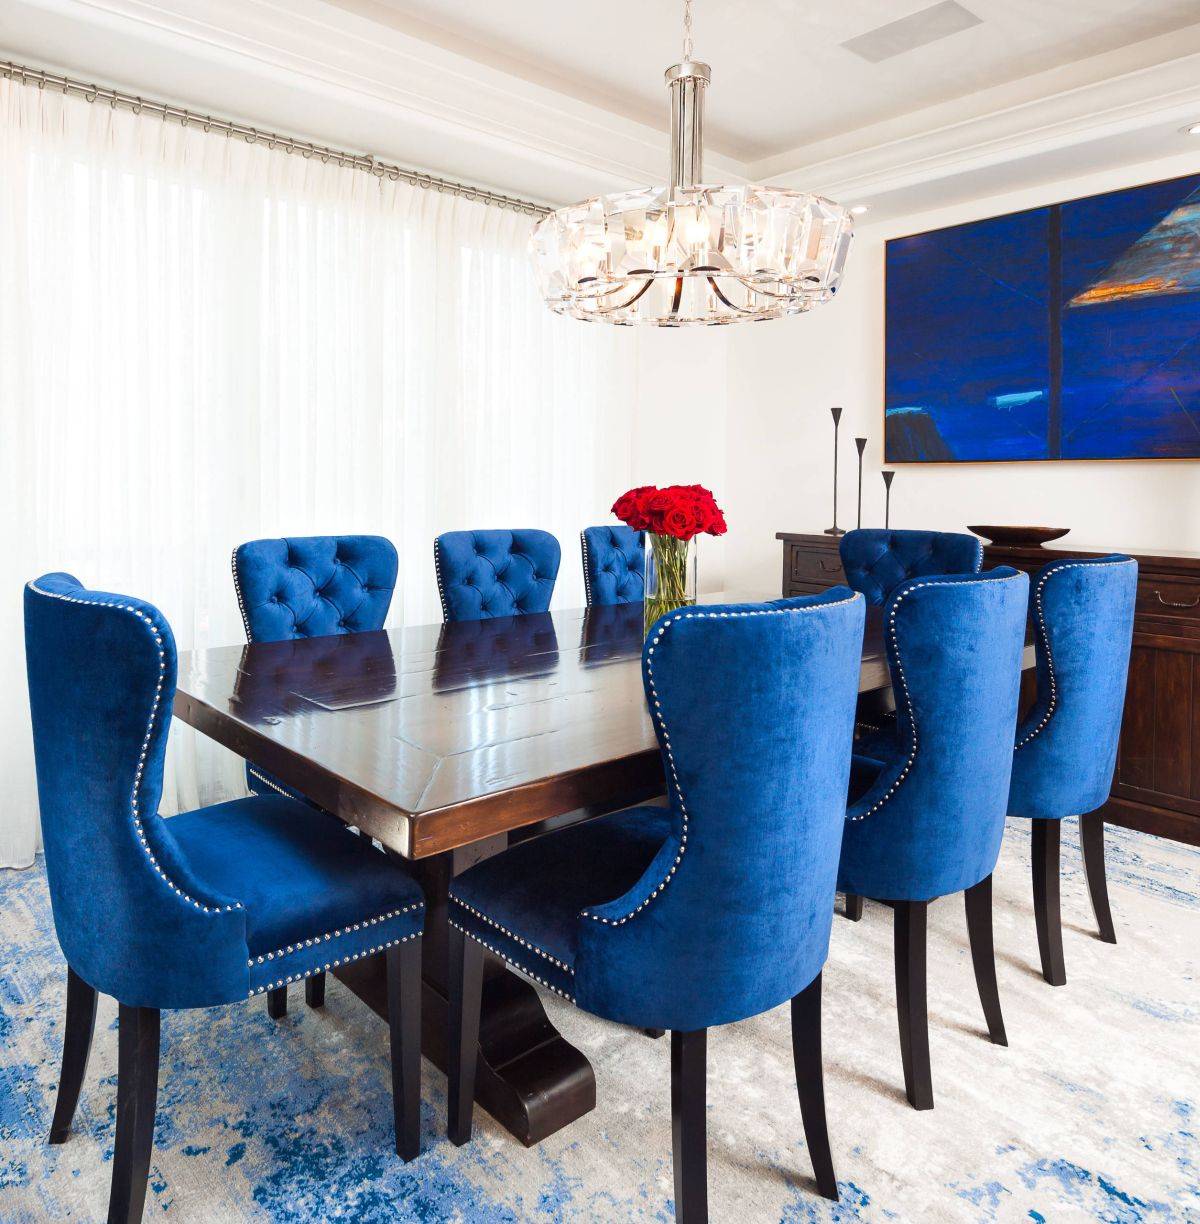 Wall art in deep blue perfectly complements the colorful chairs in this white dining room